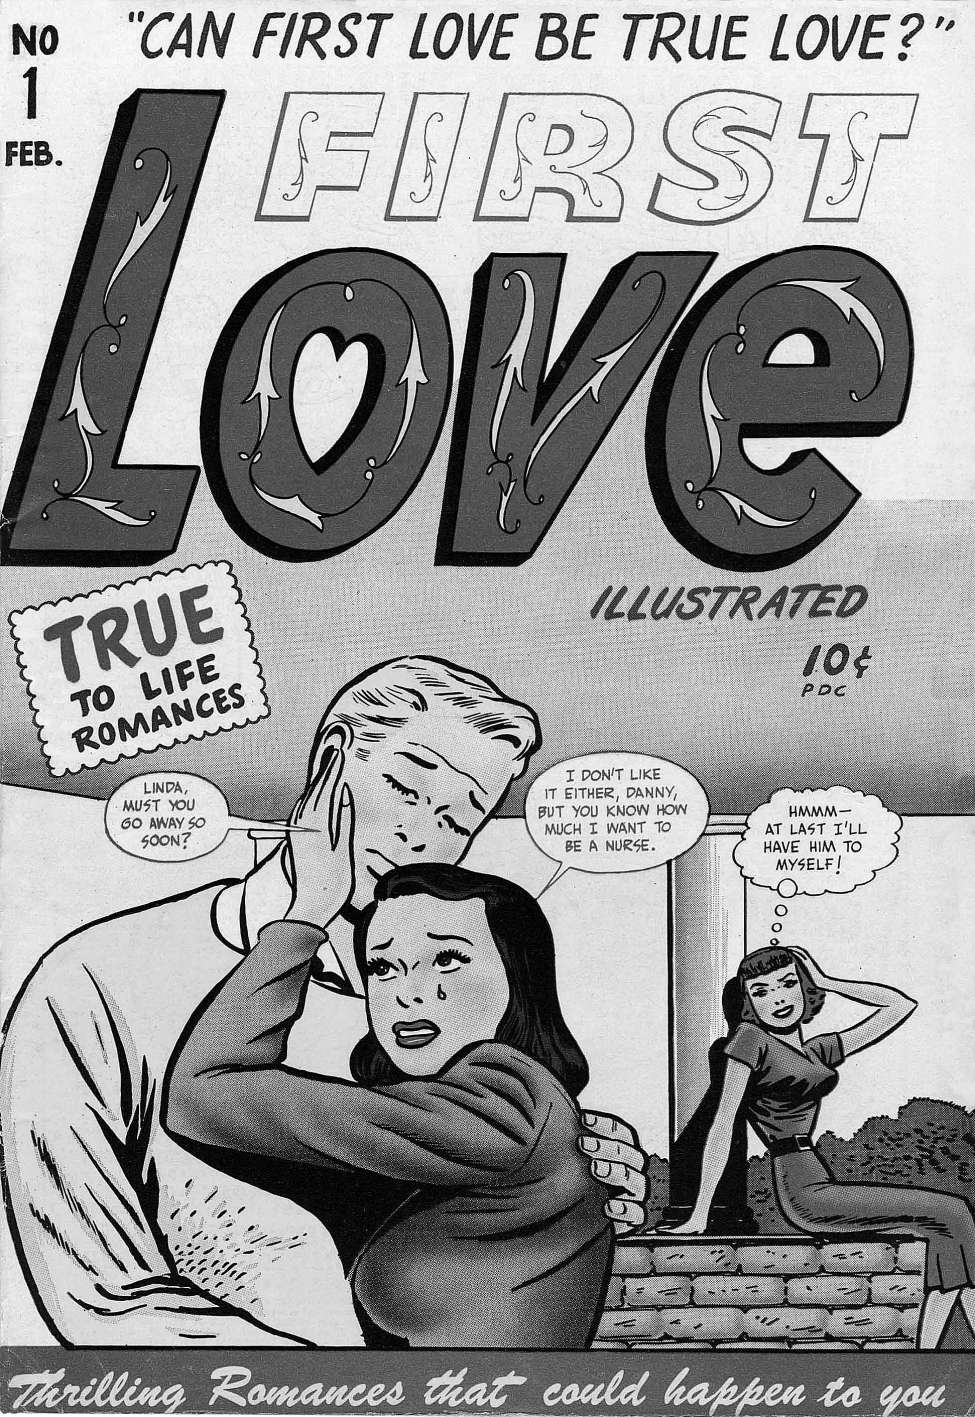 Comic Book Cover For First Love Illustrated 1 (Special Ed.) - Version 2